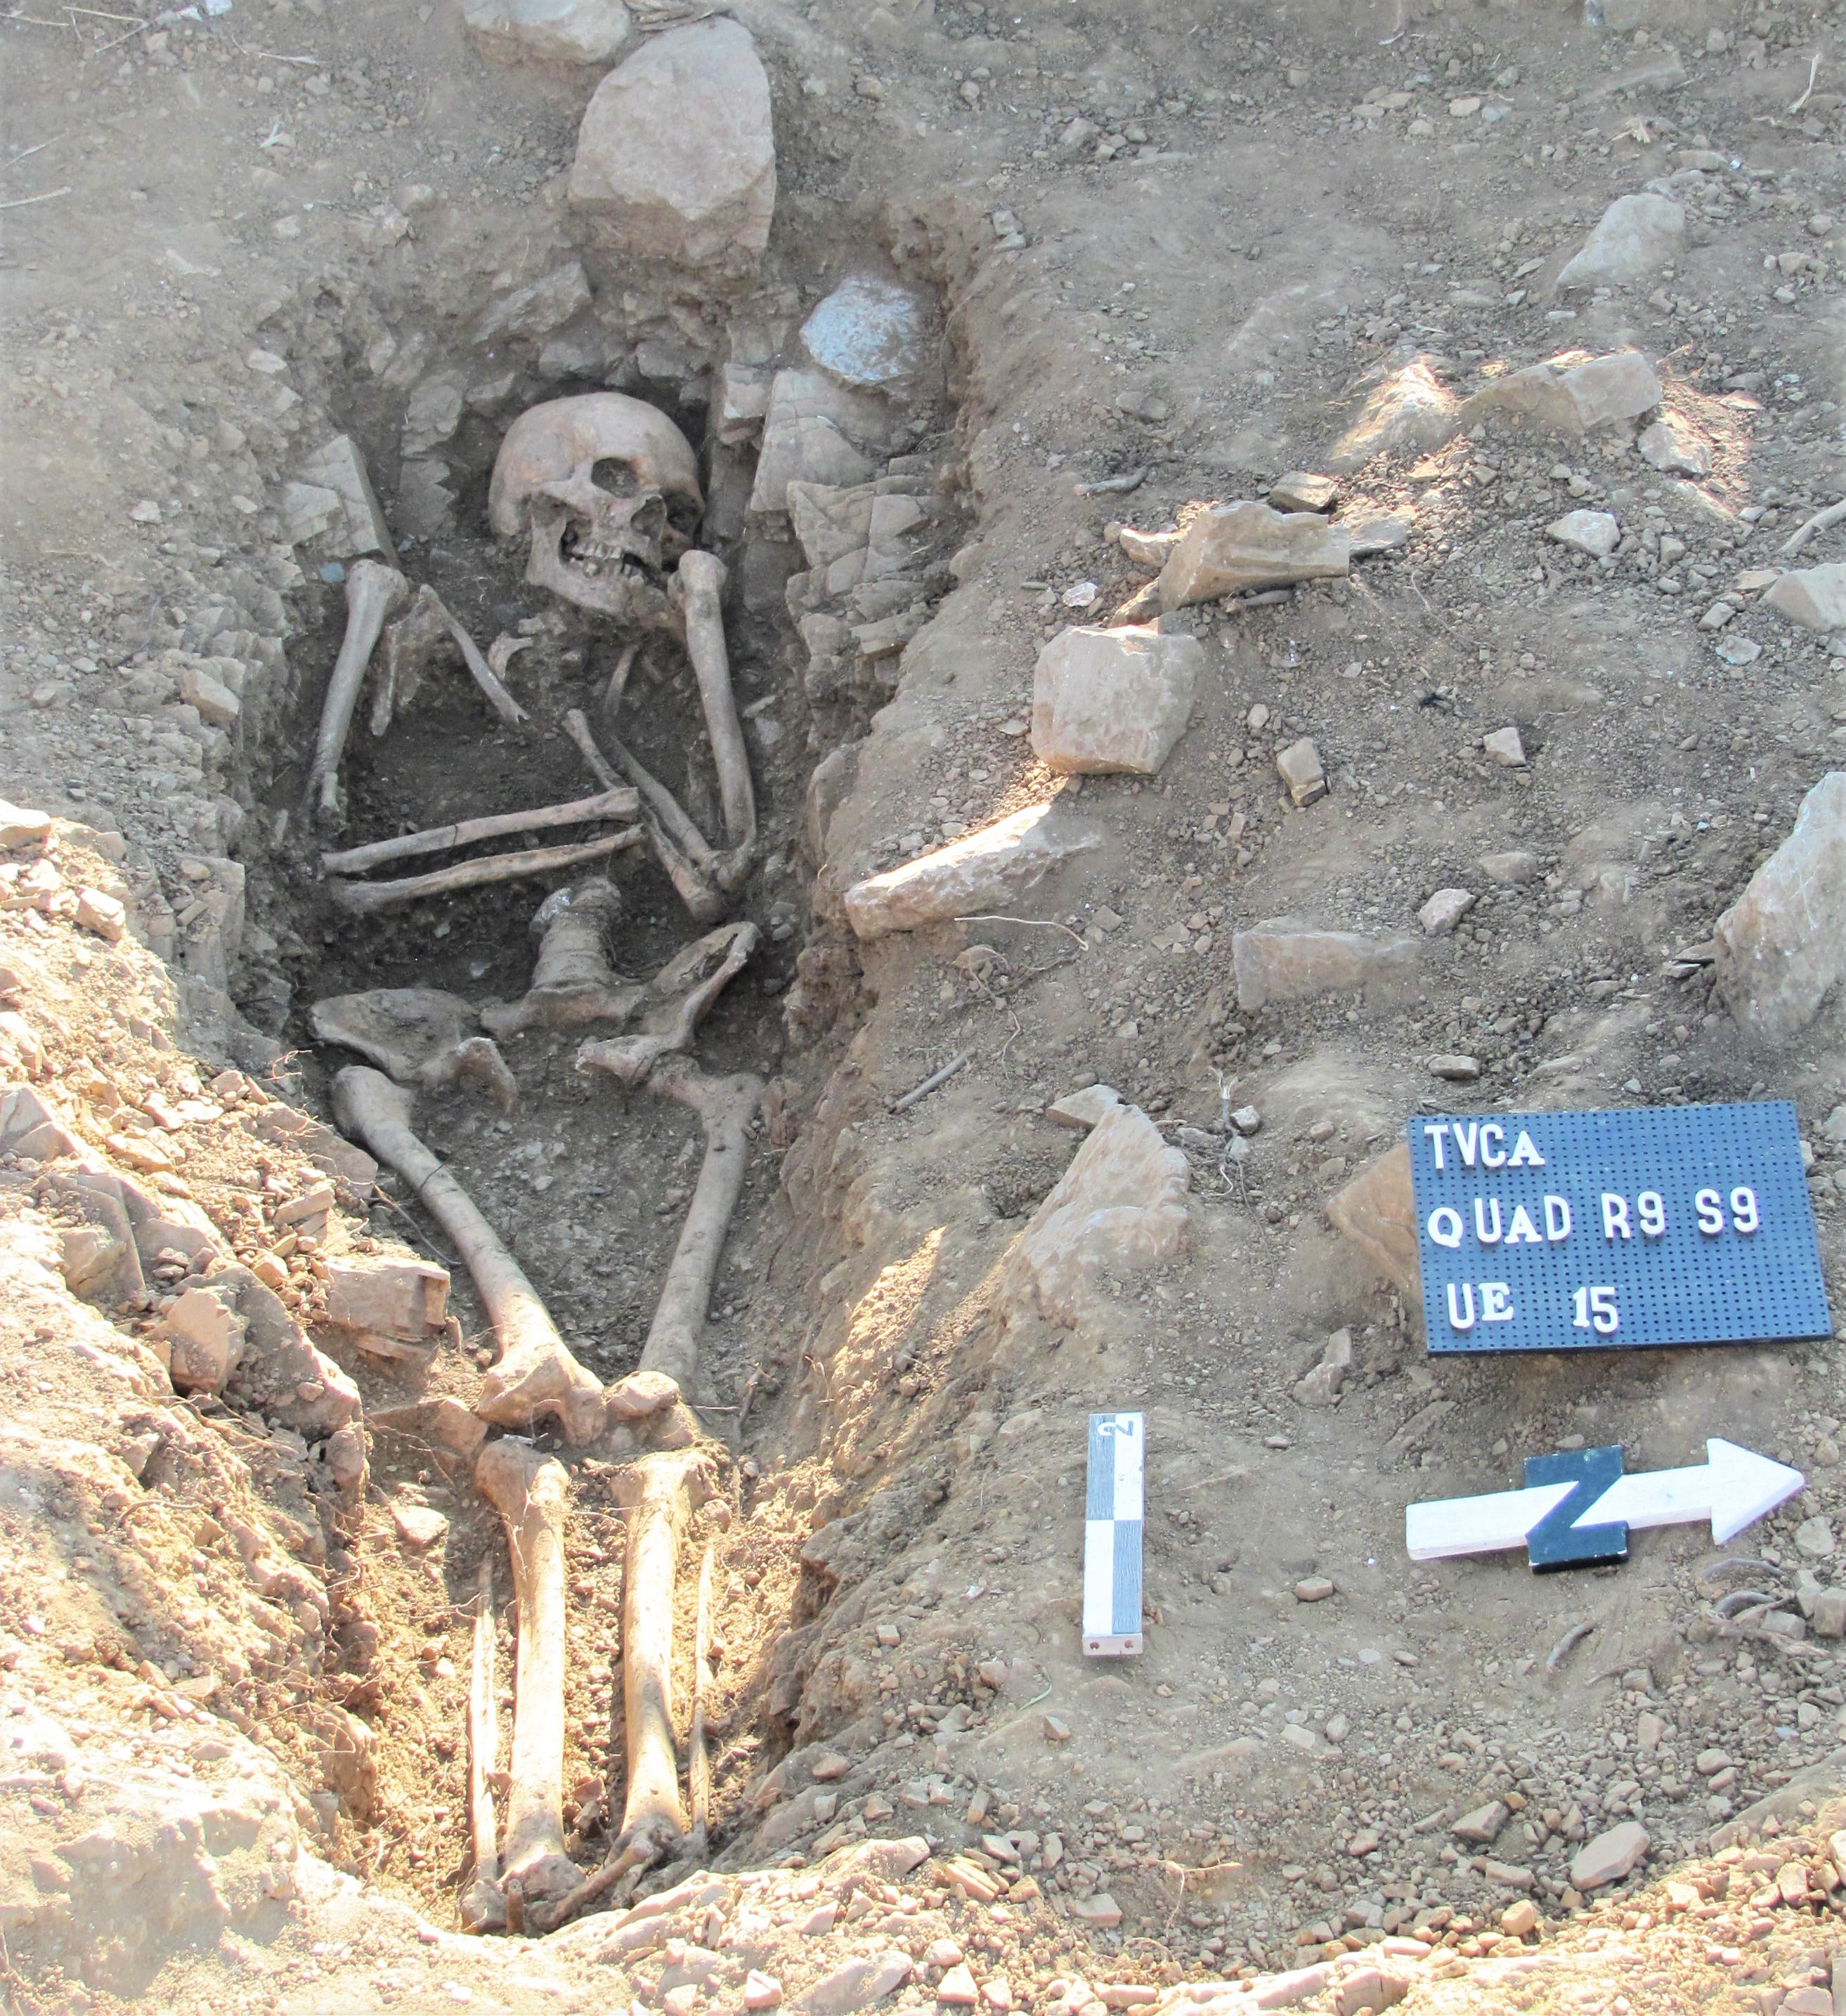 A skeleton lying in an excavated grave